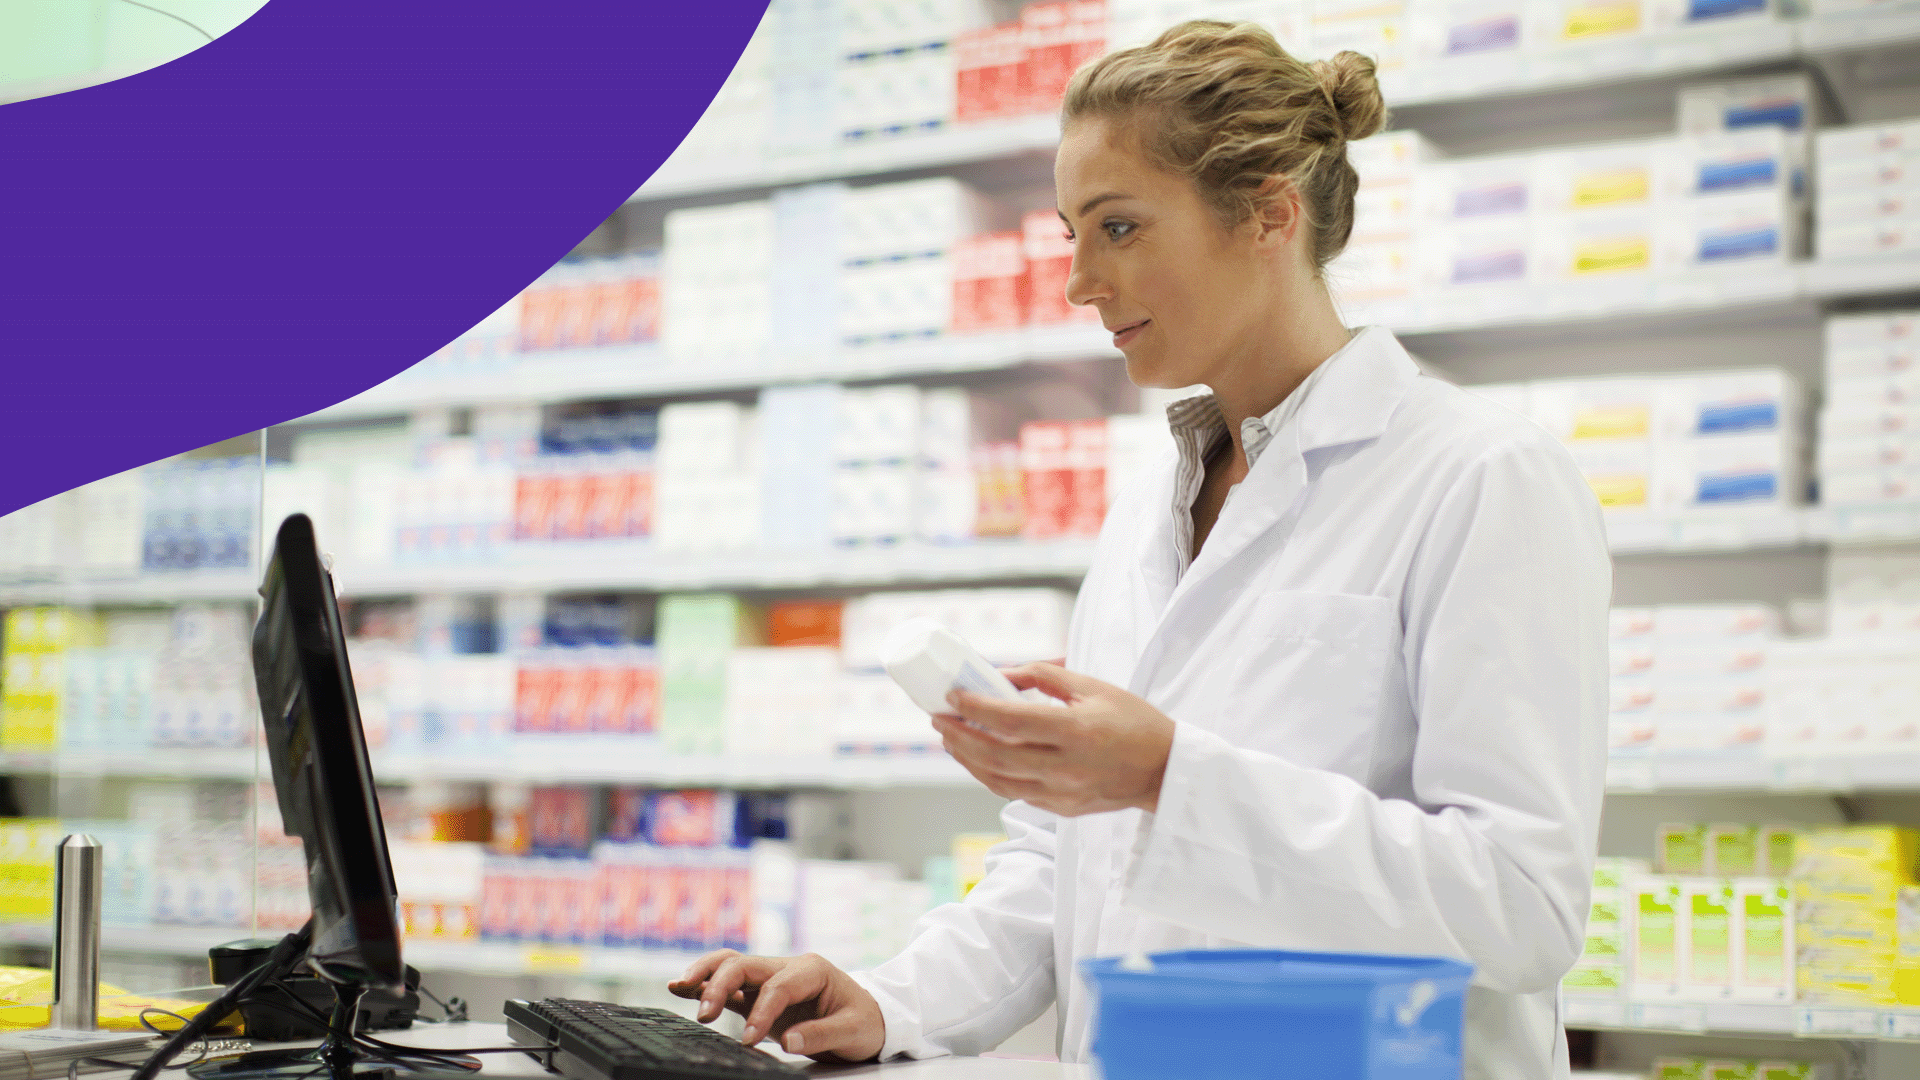 A woman at a cash register represents the average pharmacy technician salary